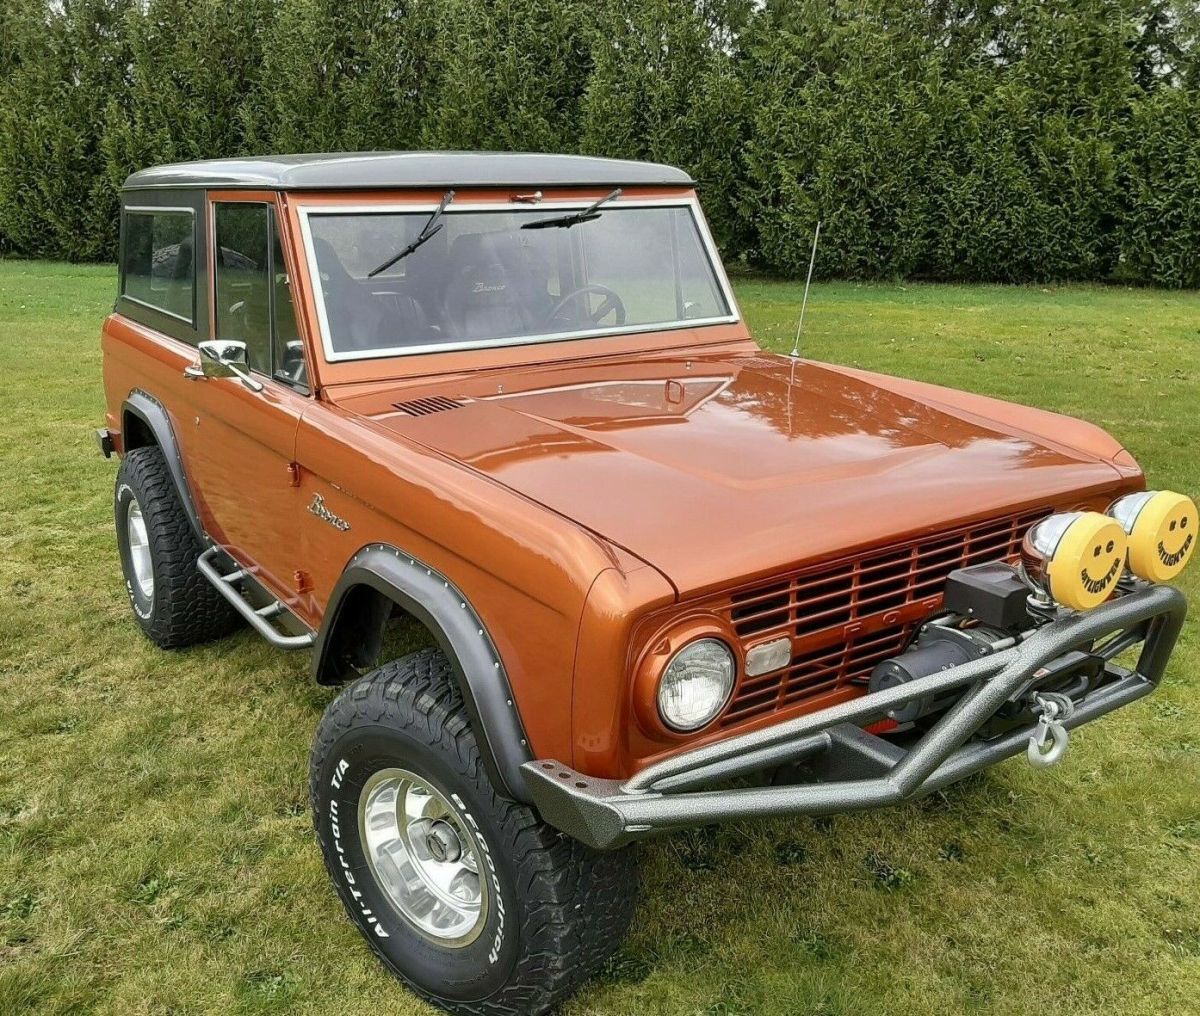 1968 Ford Bronco RESTORED. 90 ADDITIONAL PICTURES. ONE OF A KIND!